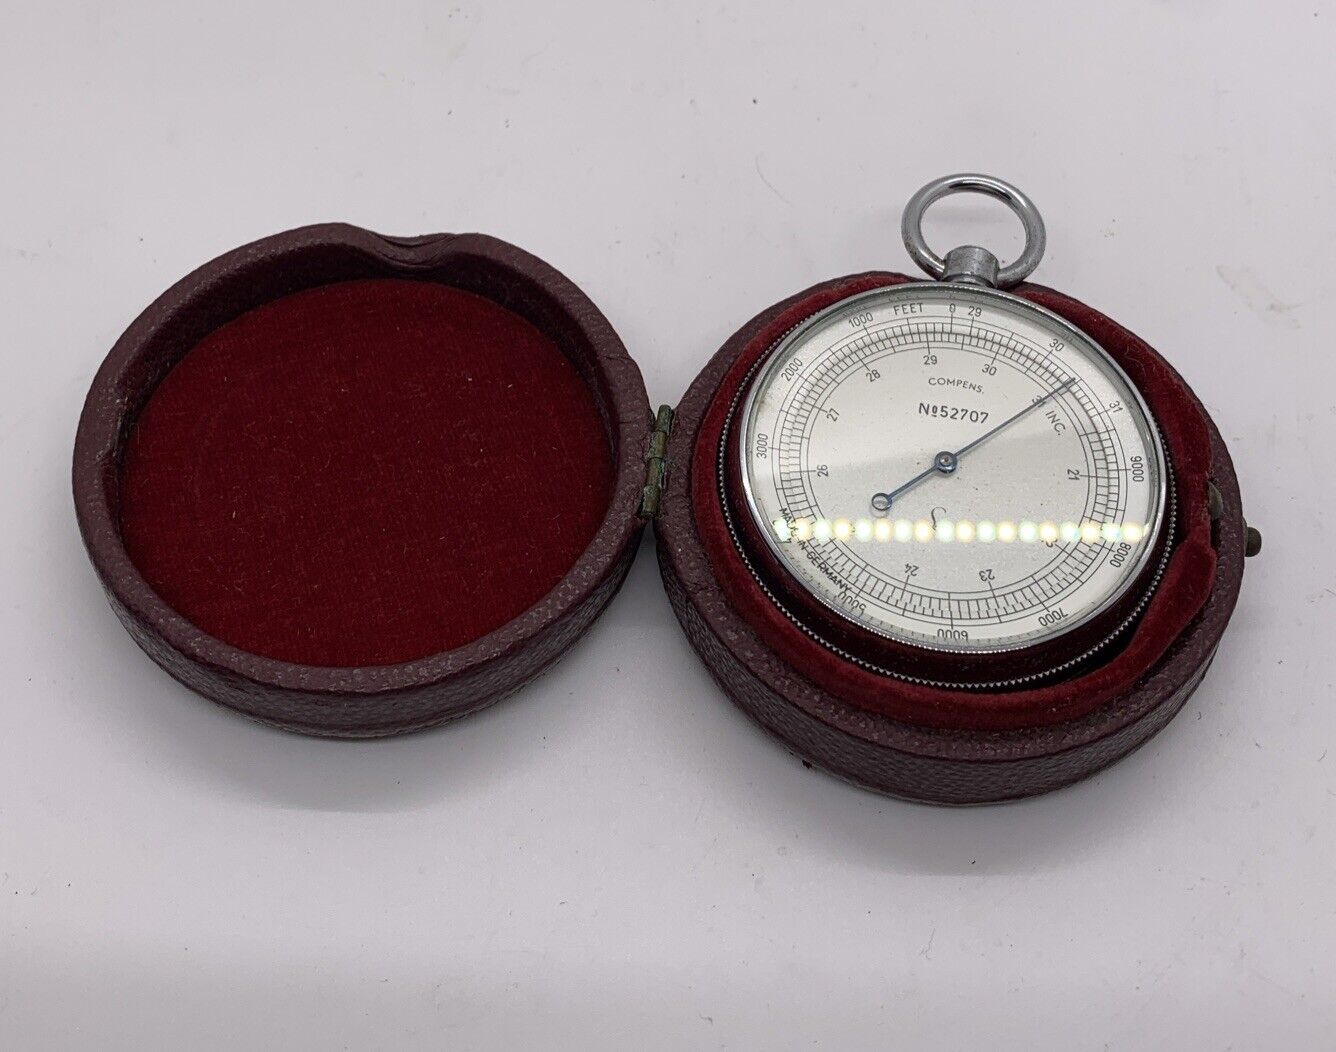 Chrome Plated POCKET ANEROID COMPENS BAROMETER ALTIMETER LUFFT GERMAN with case